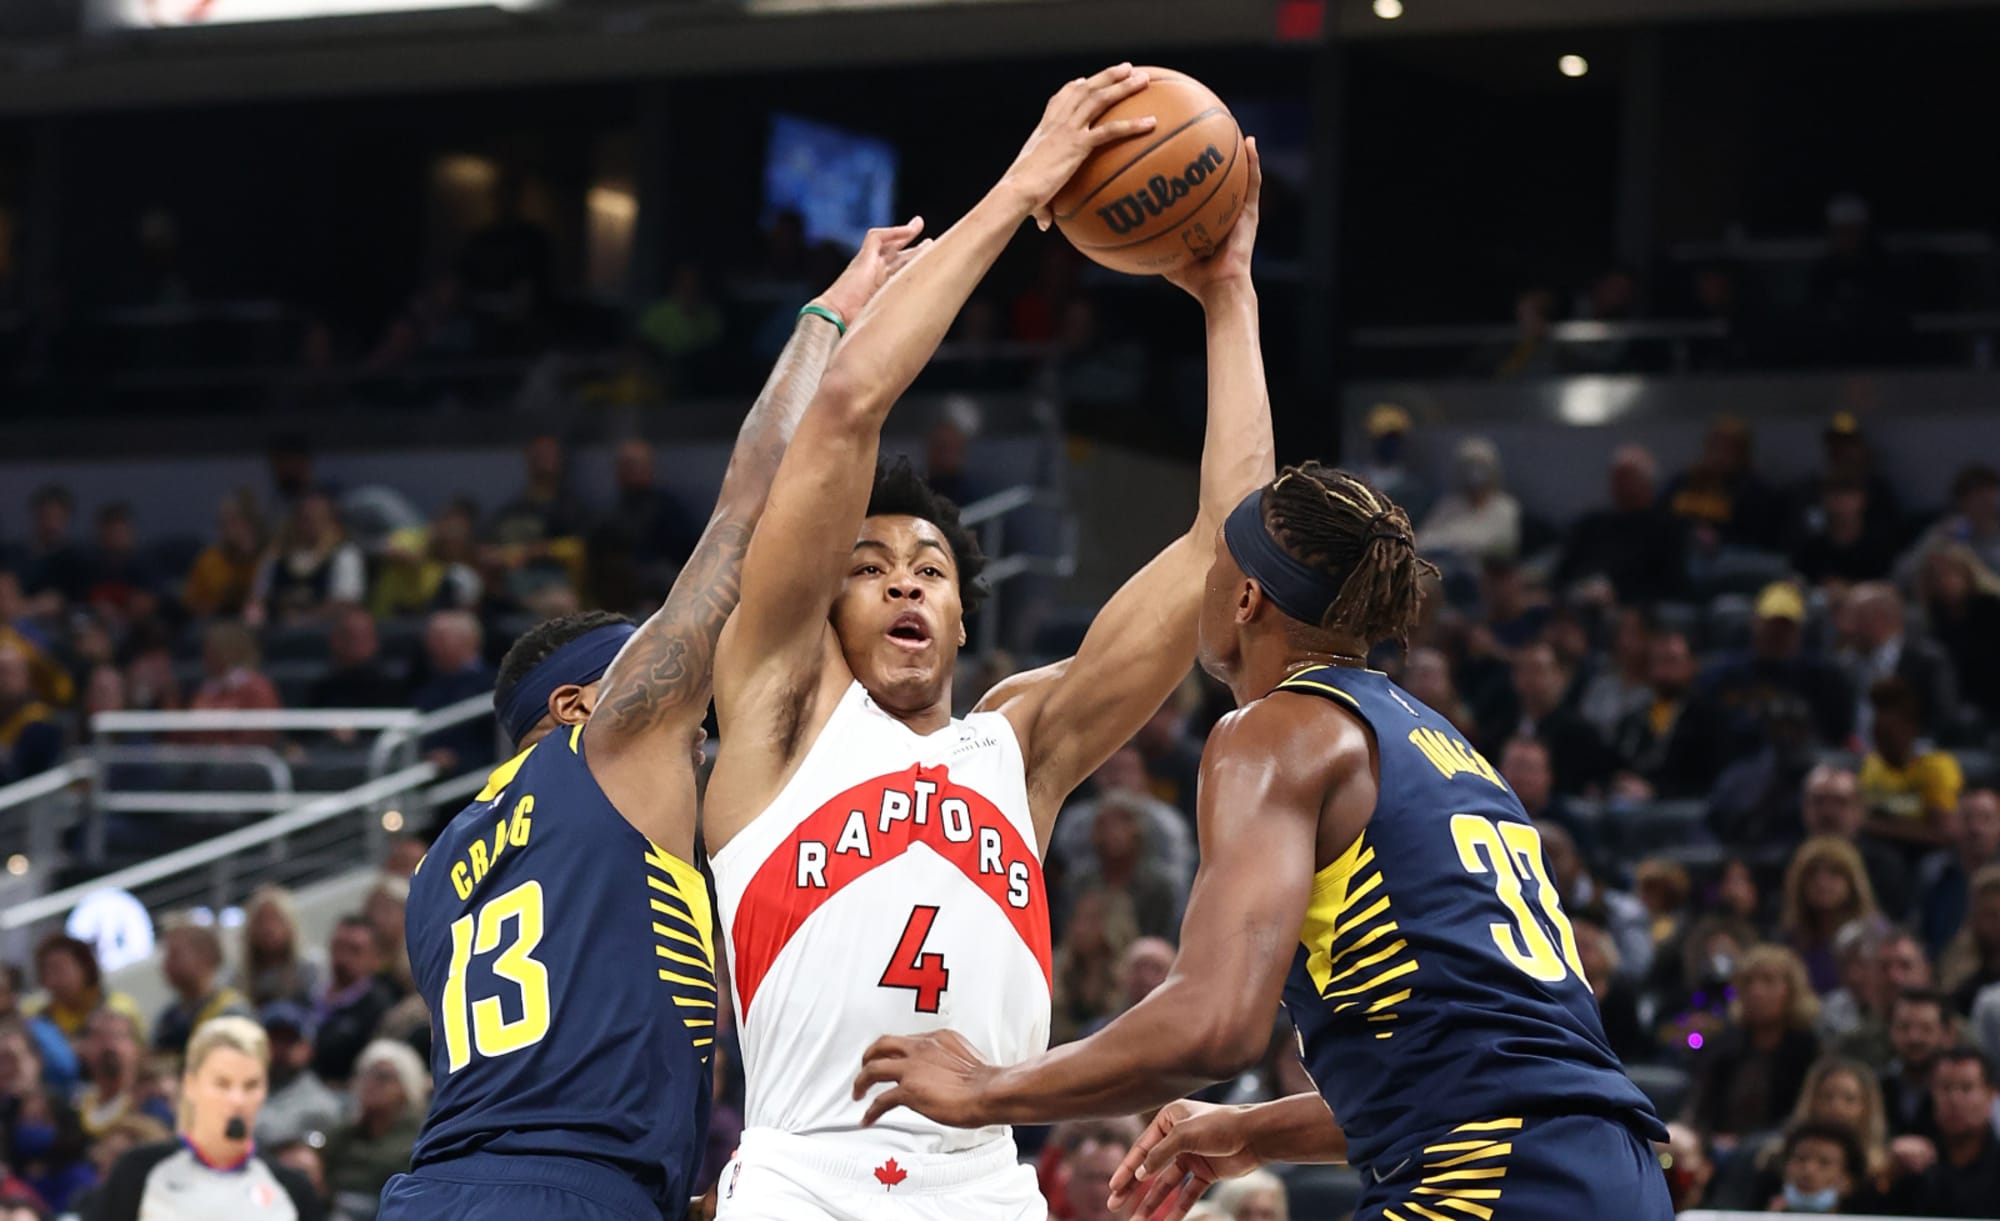 Raptors Game Tonight: Raptors vs Pacers Odds, Starting Lineup, Injury Report, Predictions, TV Channel for Nov. 26